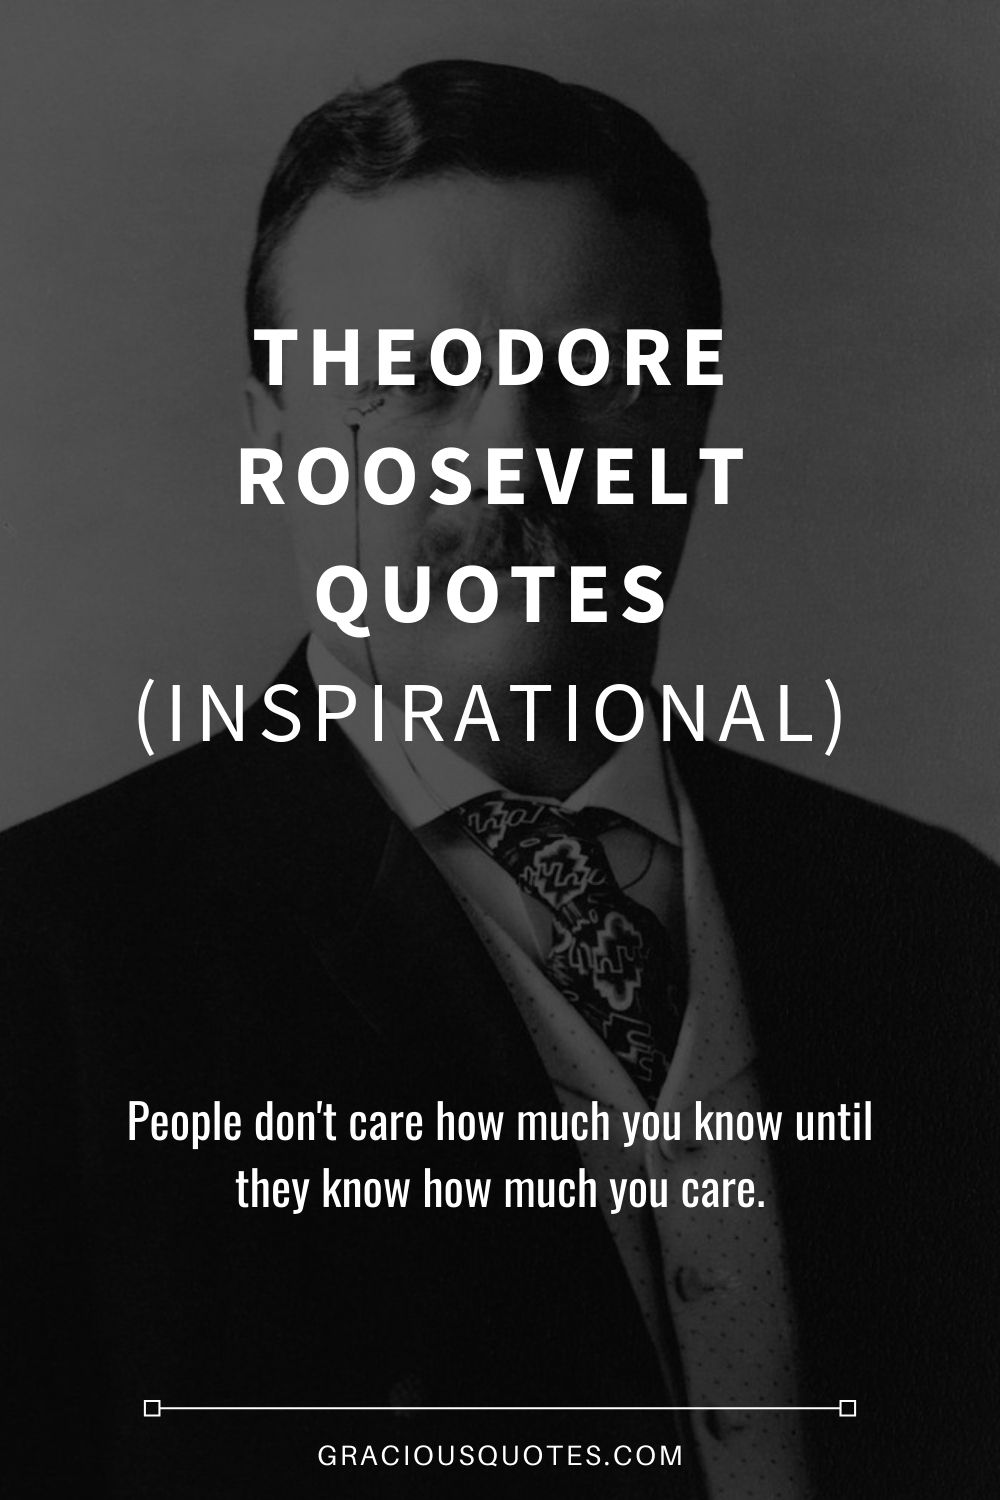 Theodore Roosevelt Quotes (INSPIRATIONAL) - Gracious Quotes